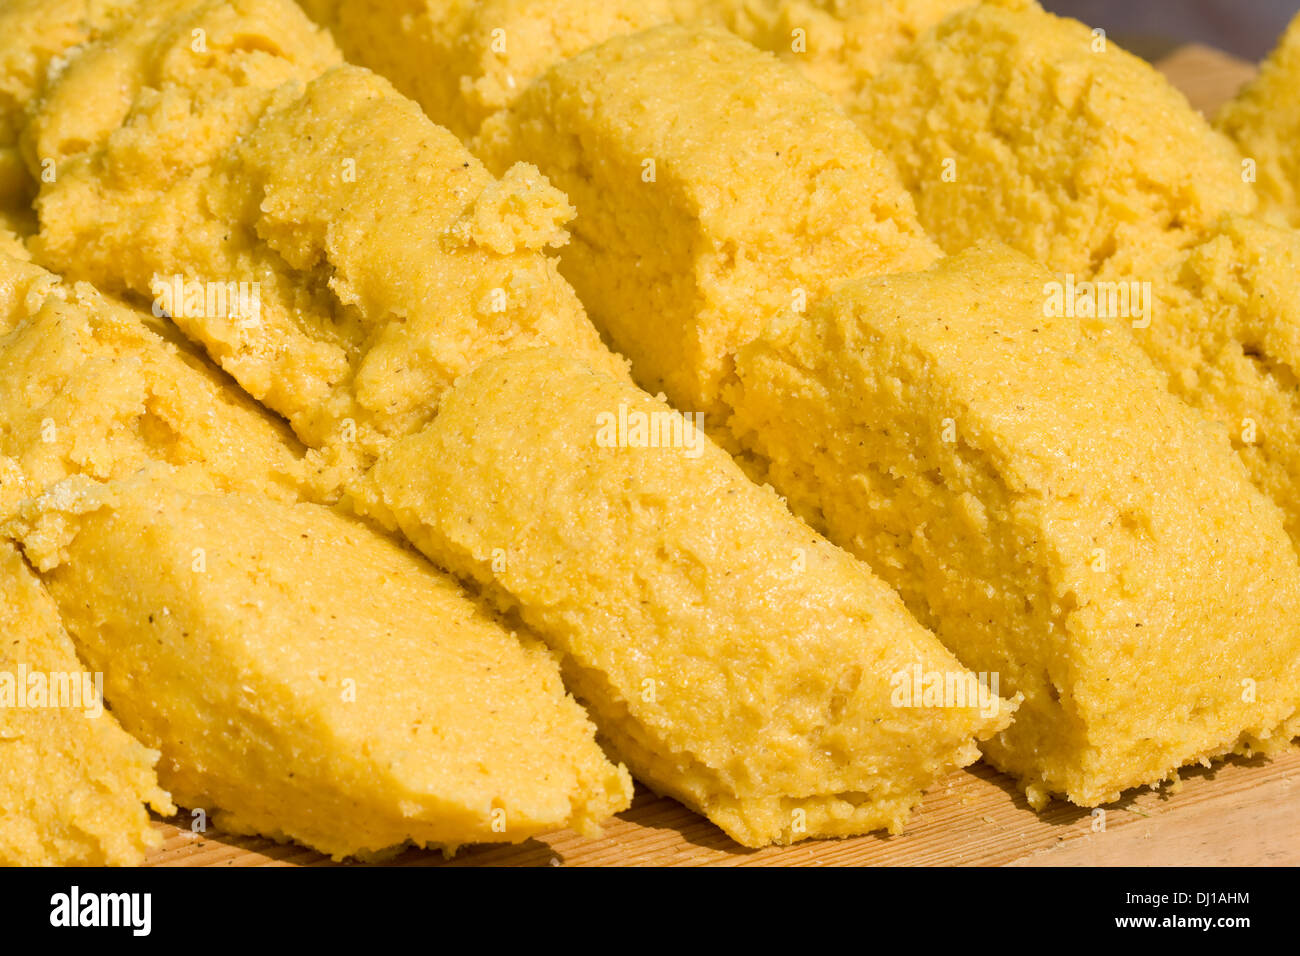 Corn porridge - traditional east European food made of corn flour, boiled in water. In some areas often replaces the bread. Stock Photo